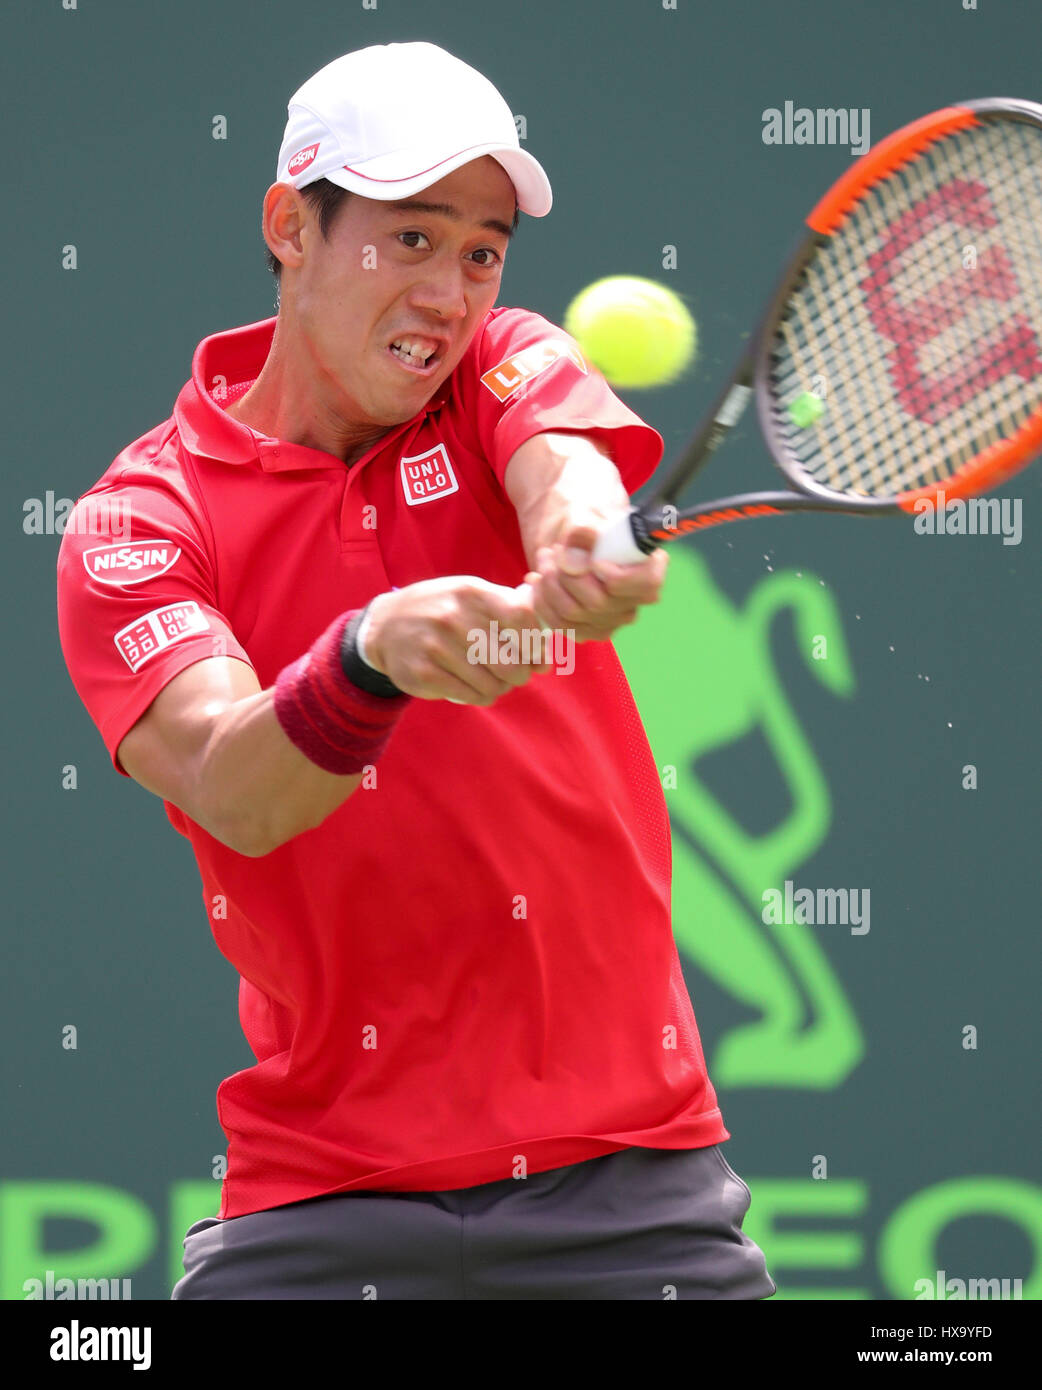 Key Biscayne, Florida, USA. 26th Mar, 2017. Kei Nishikori, of Japan, hits a backhand against Fernando Verdasco, of Spain, during his winning match at the 2017 Miami Open presented by Itau professional tennis tournament, played at Crandon Park Tennis Center in Key Biscayne, Florida, USA. Nishikori d Verdasco 7-6(2) 6-7(5) 6-1. Mario Houben/CSM/Alamy Live News Stock Photo